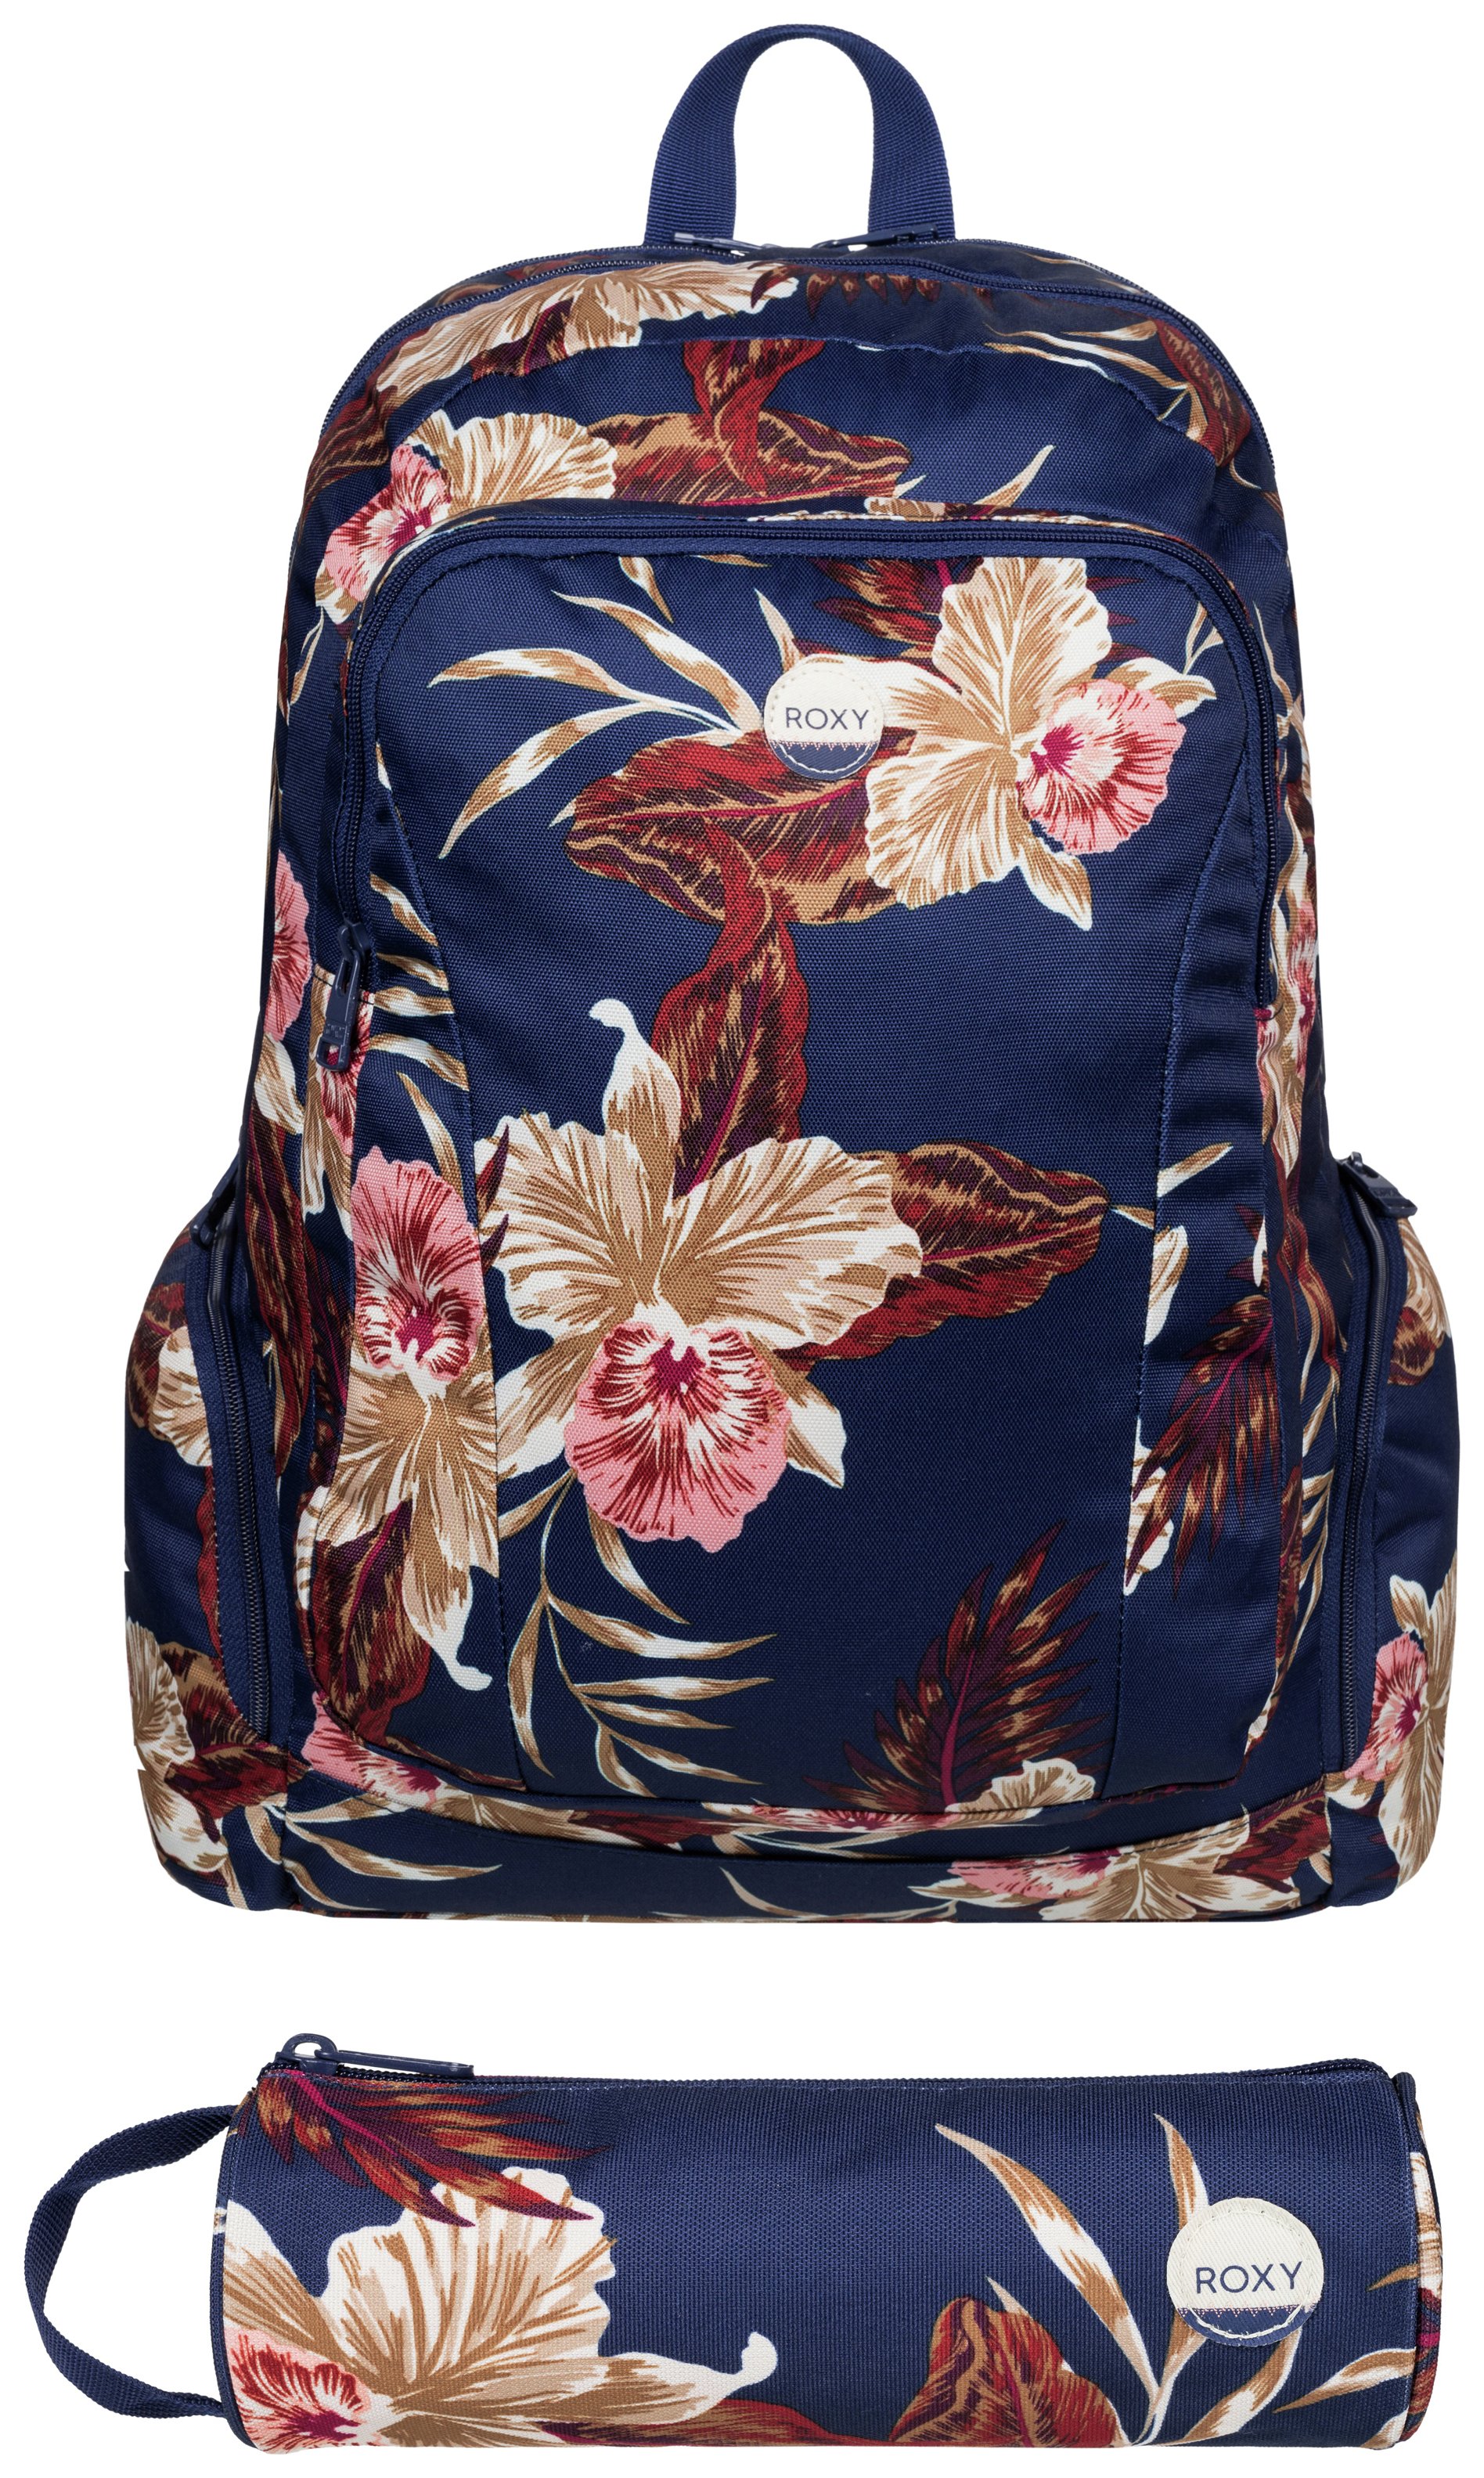 Review of Roxy Blue Floral Backpack with Matching Pencil Case